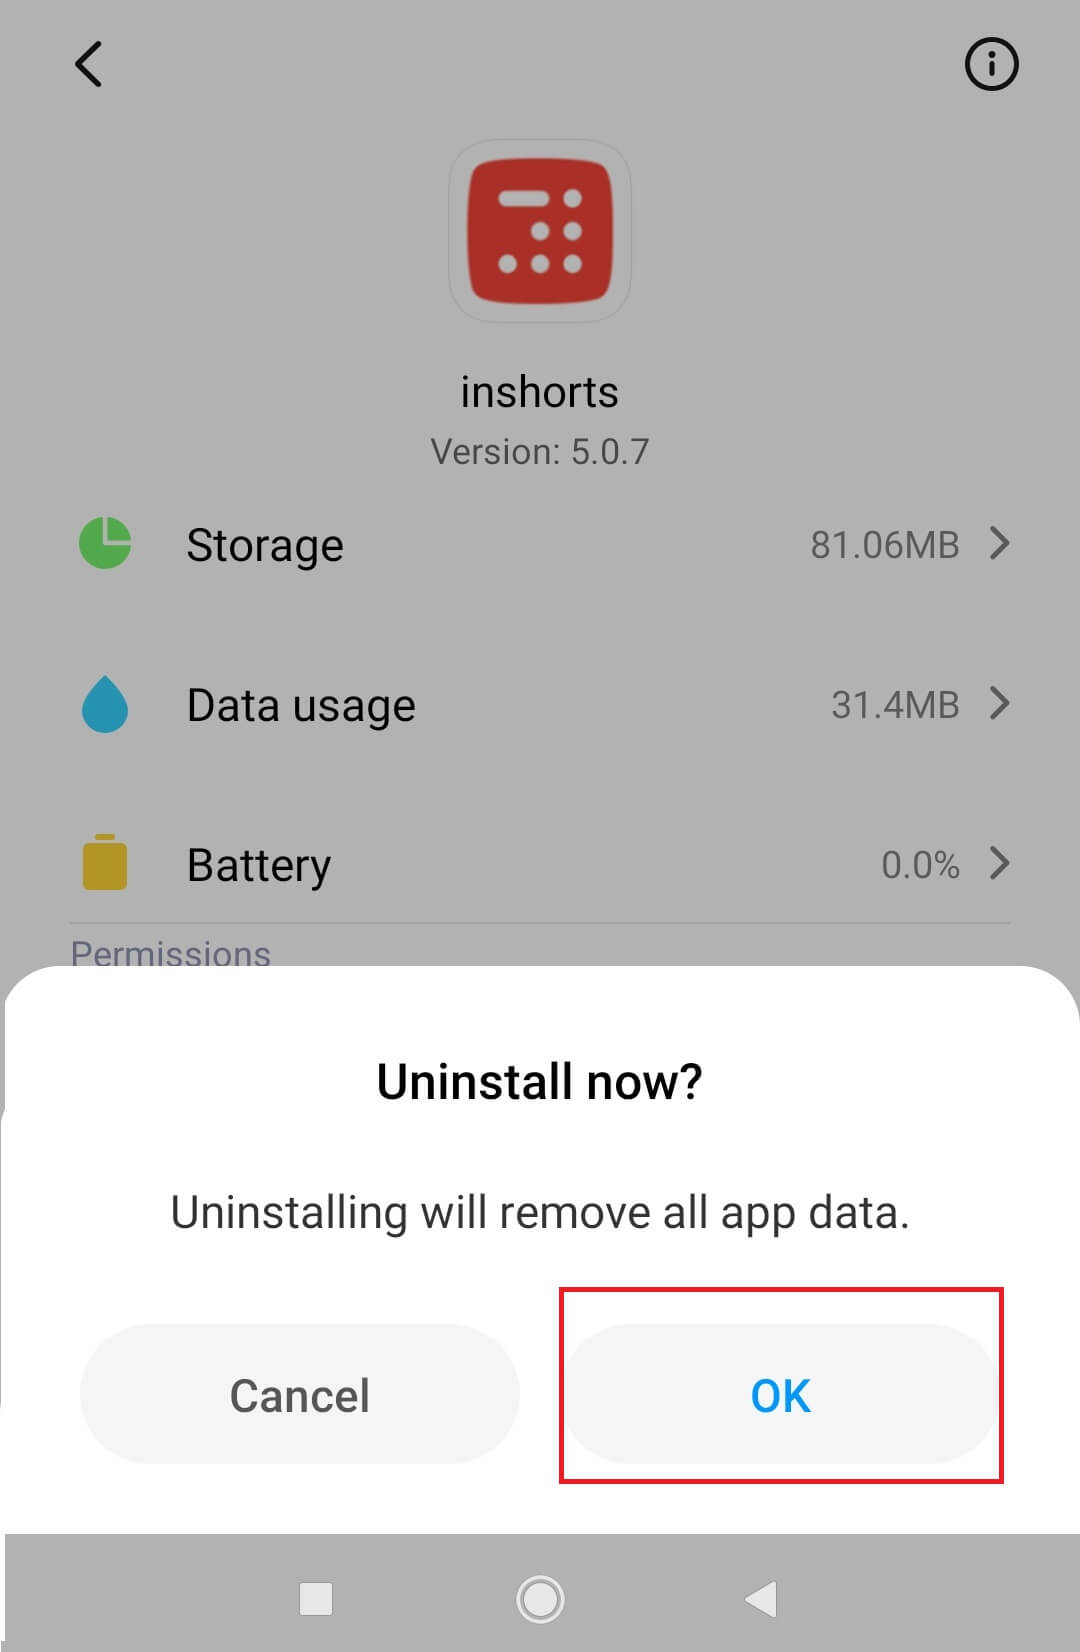 tap on the Uninstall option.